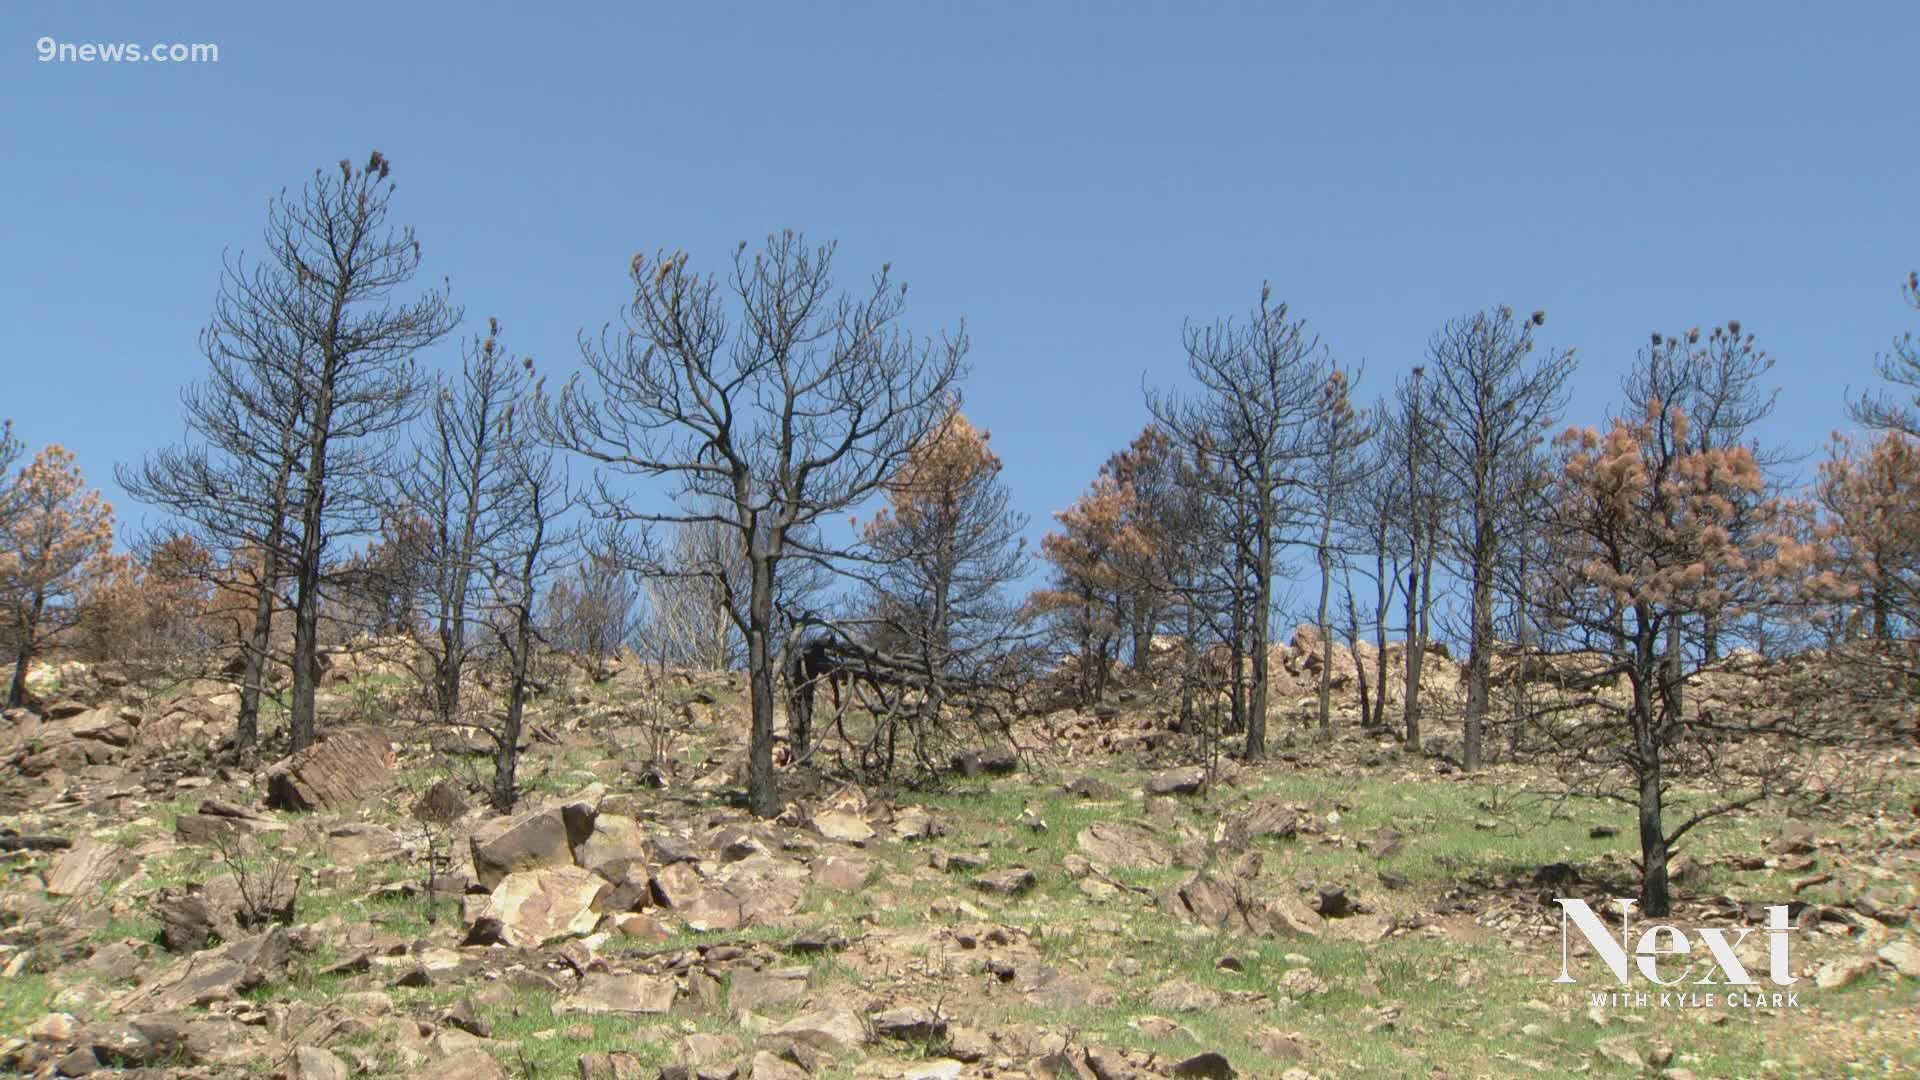 Students from American Indian Academy of Denver, a local charter school, explored burn areas of Colorado fires to see how these fires impact ecosystems.